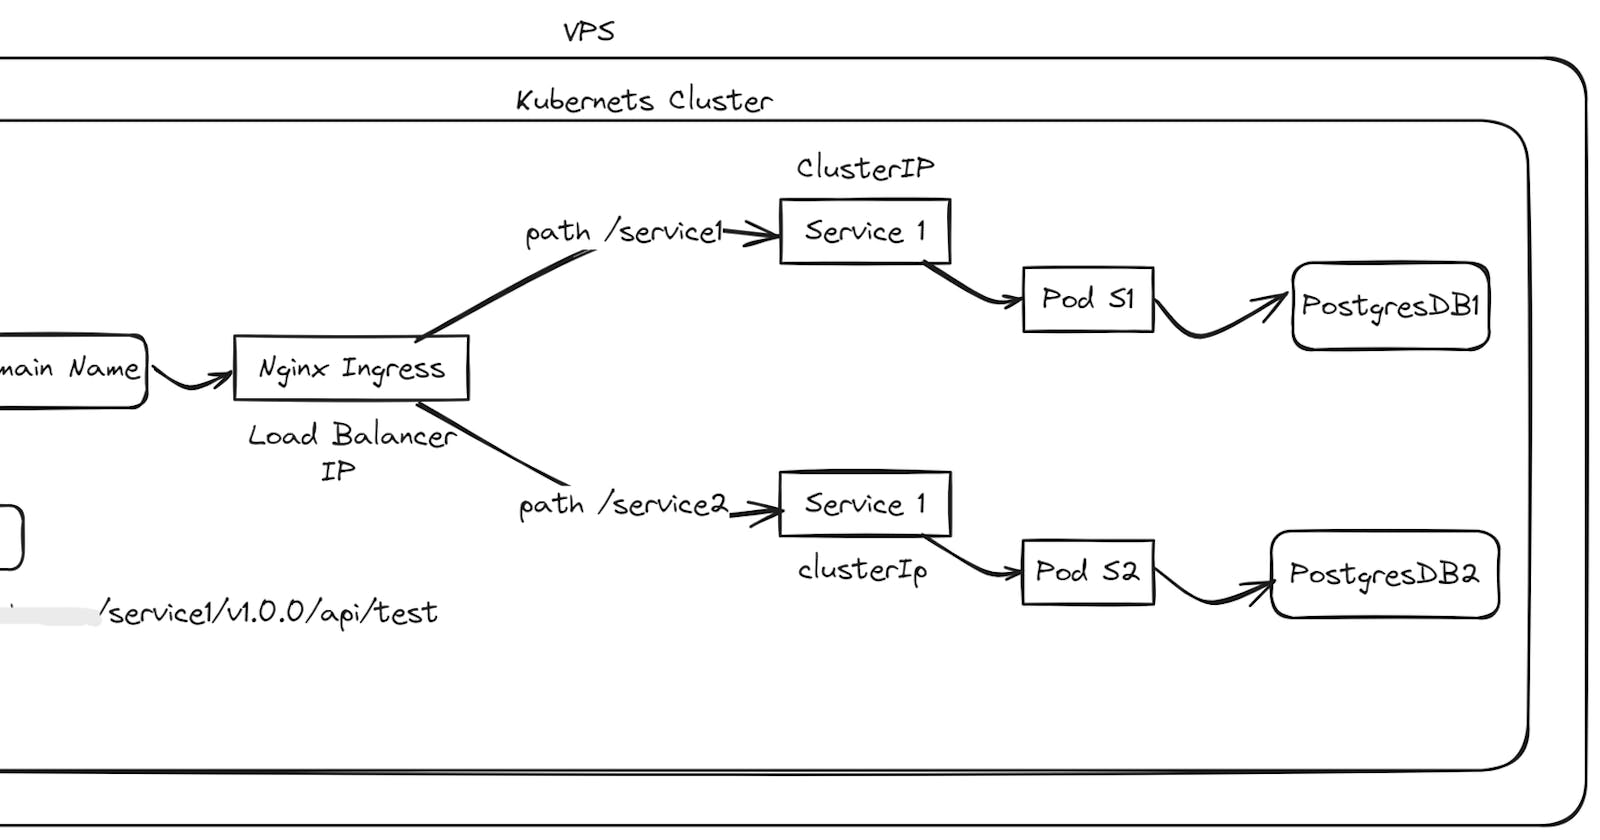 Implementing Microservices Architecture with Kubernetes and Nginx Ingress on a VPS